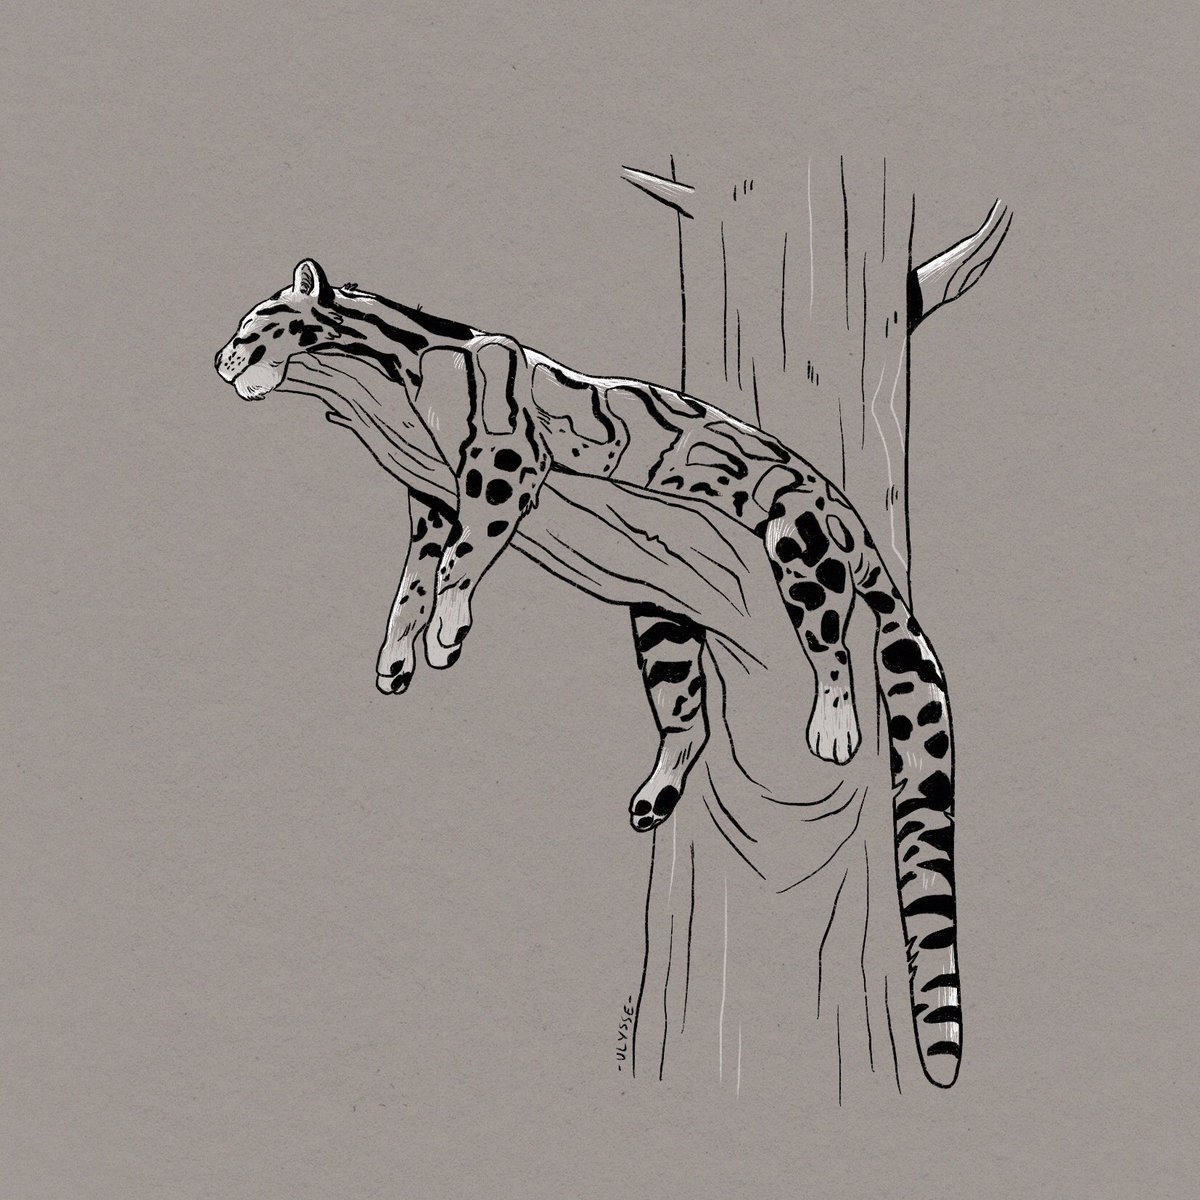 Hey! It's the #InternationalCloudedLeopardDay! 🐾 